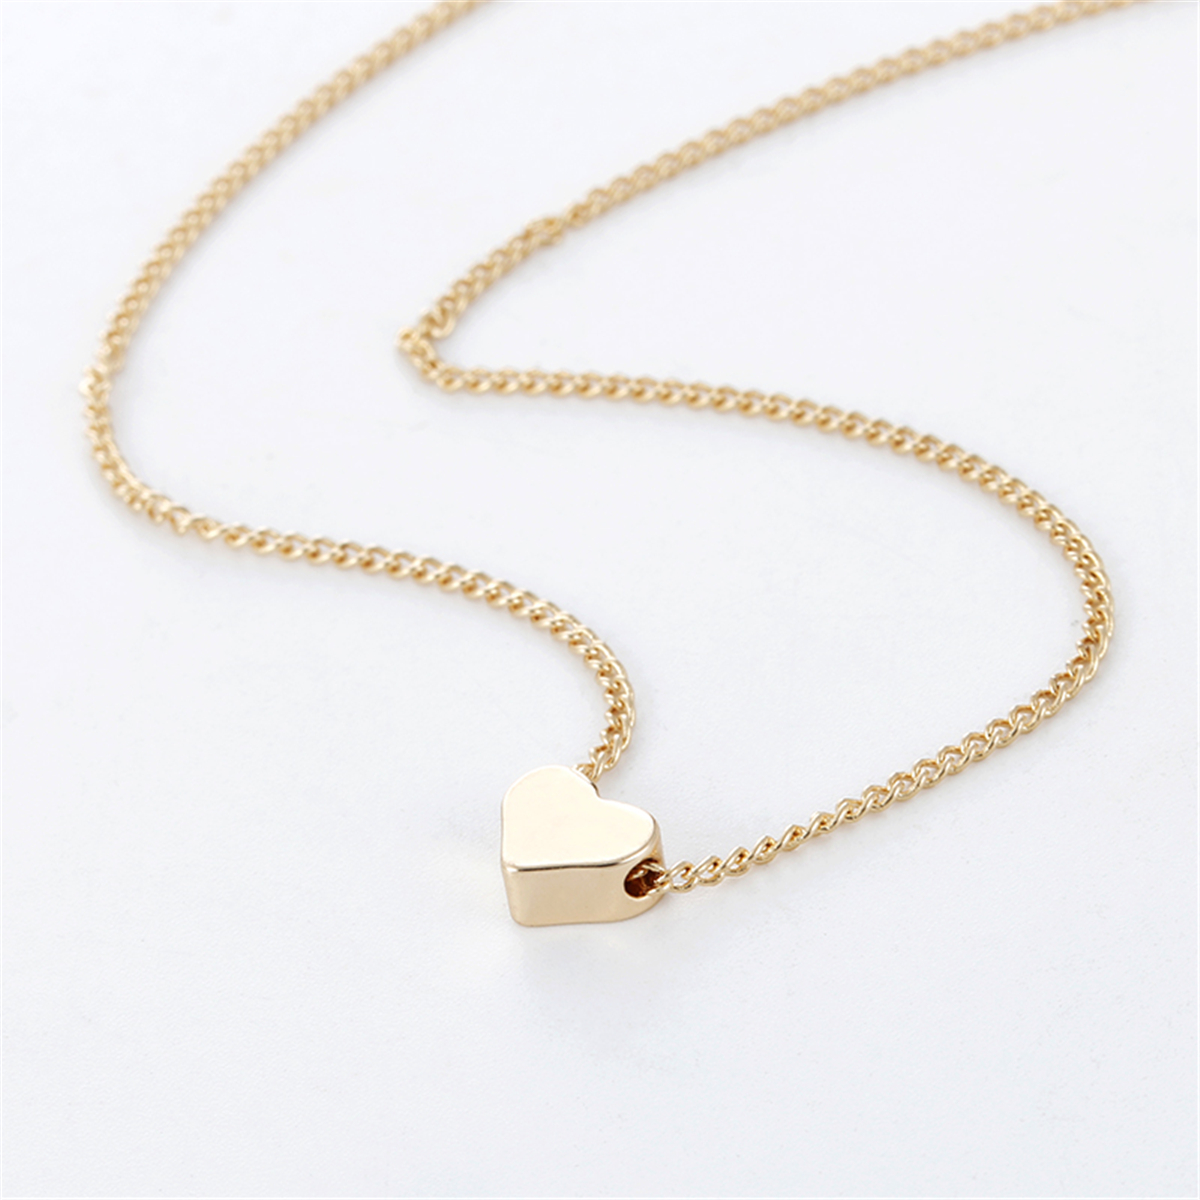 93dffd4a e0e7 4951 ade9 ac181c42f479 - Simple Fashion Gold color Double-sided Love Pendant Necklaces Clavicle Chains Necklace Women Jewelry Gift